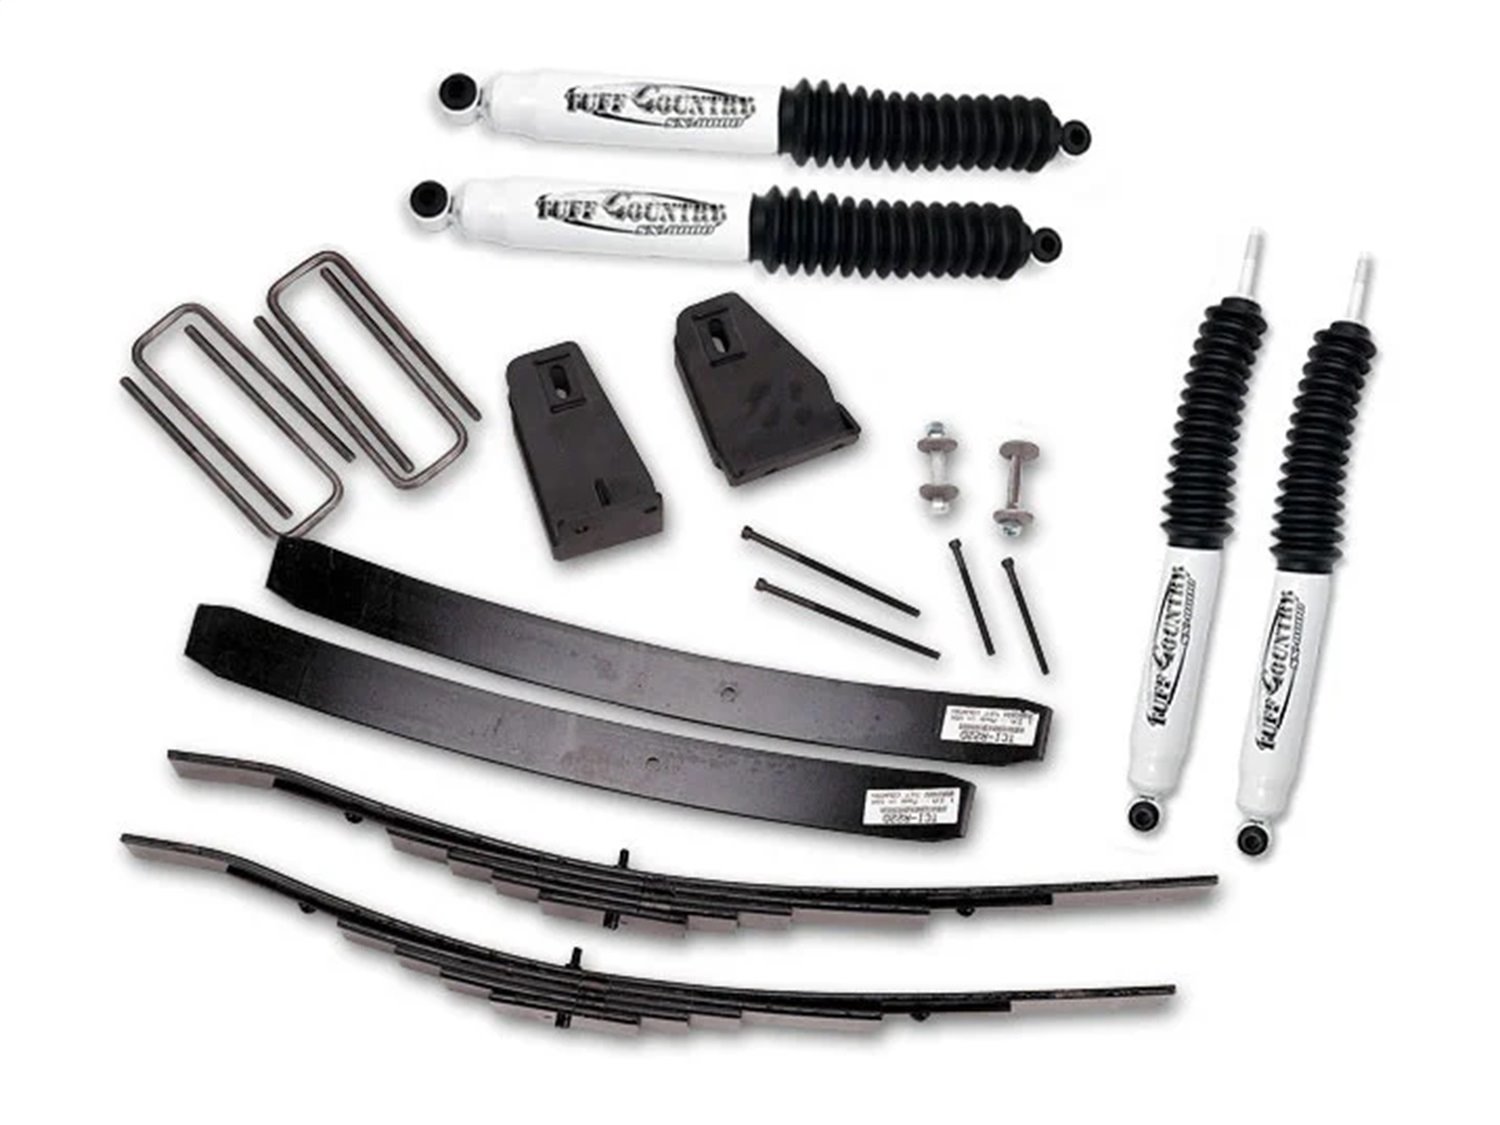 Suspension Lift Kit 1980-87 Ford F250 4wd